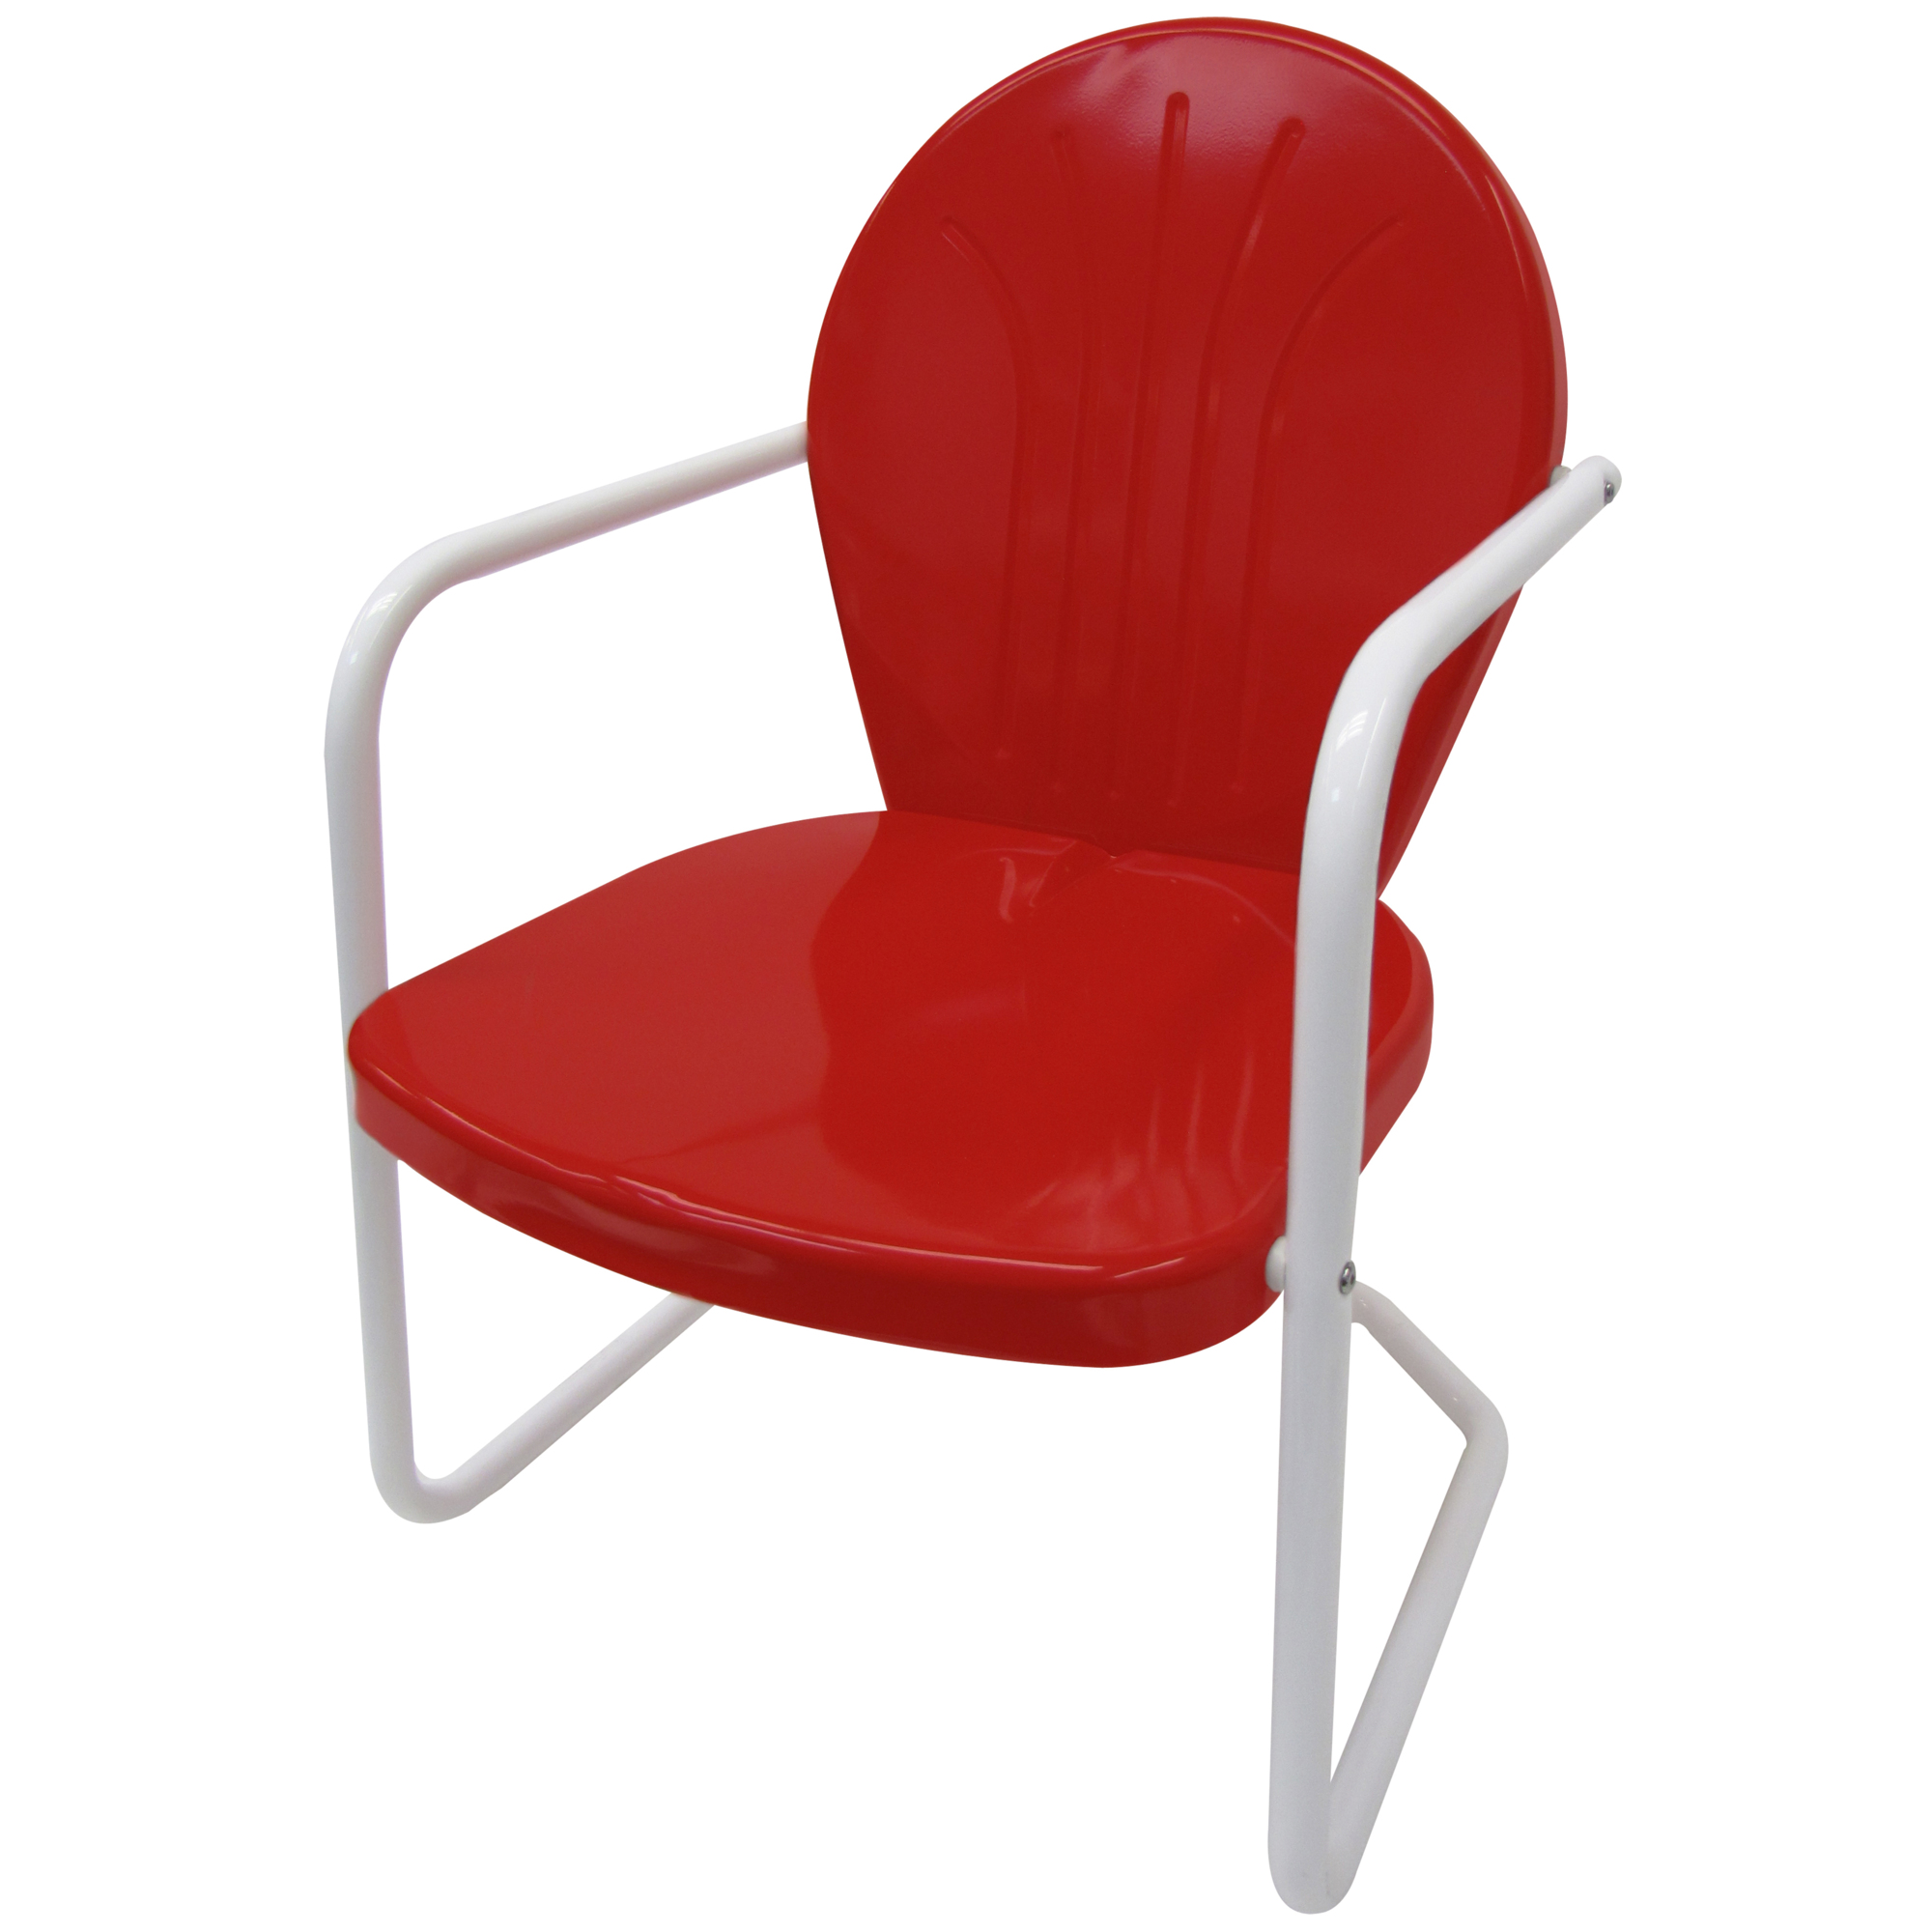 Leigh Country, Red Retro Metal Chair, Primary Color Red, Material Metal, Width 24.8 in, Model TX 93486